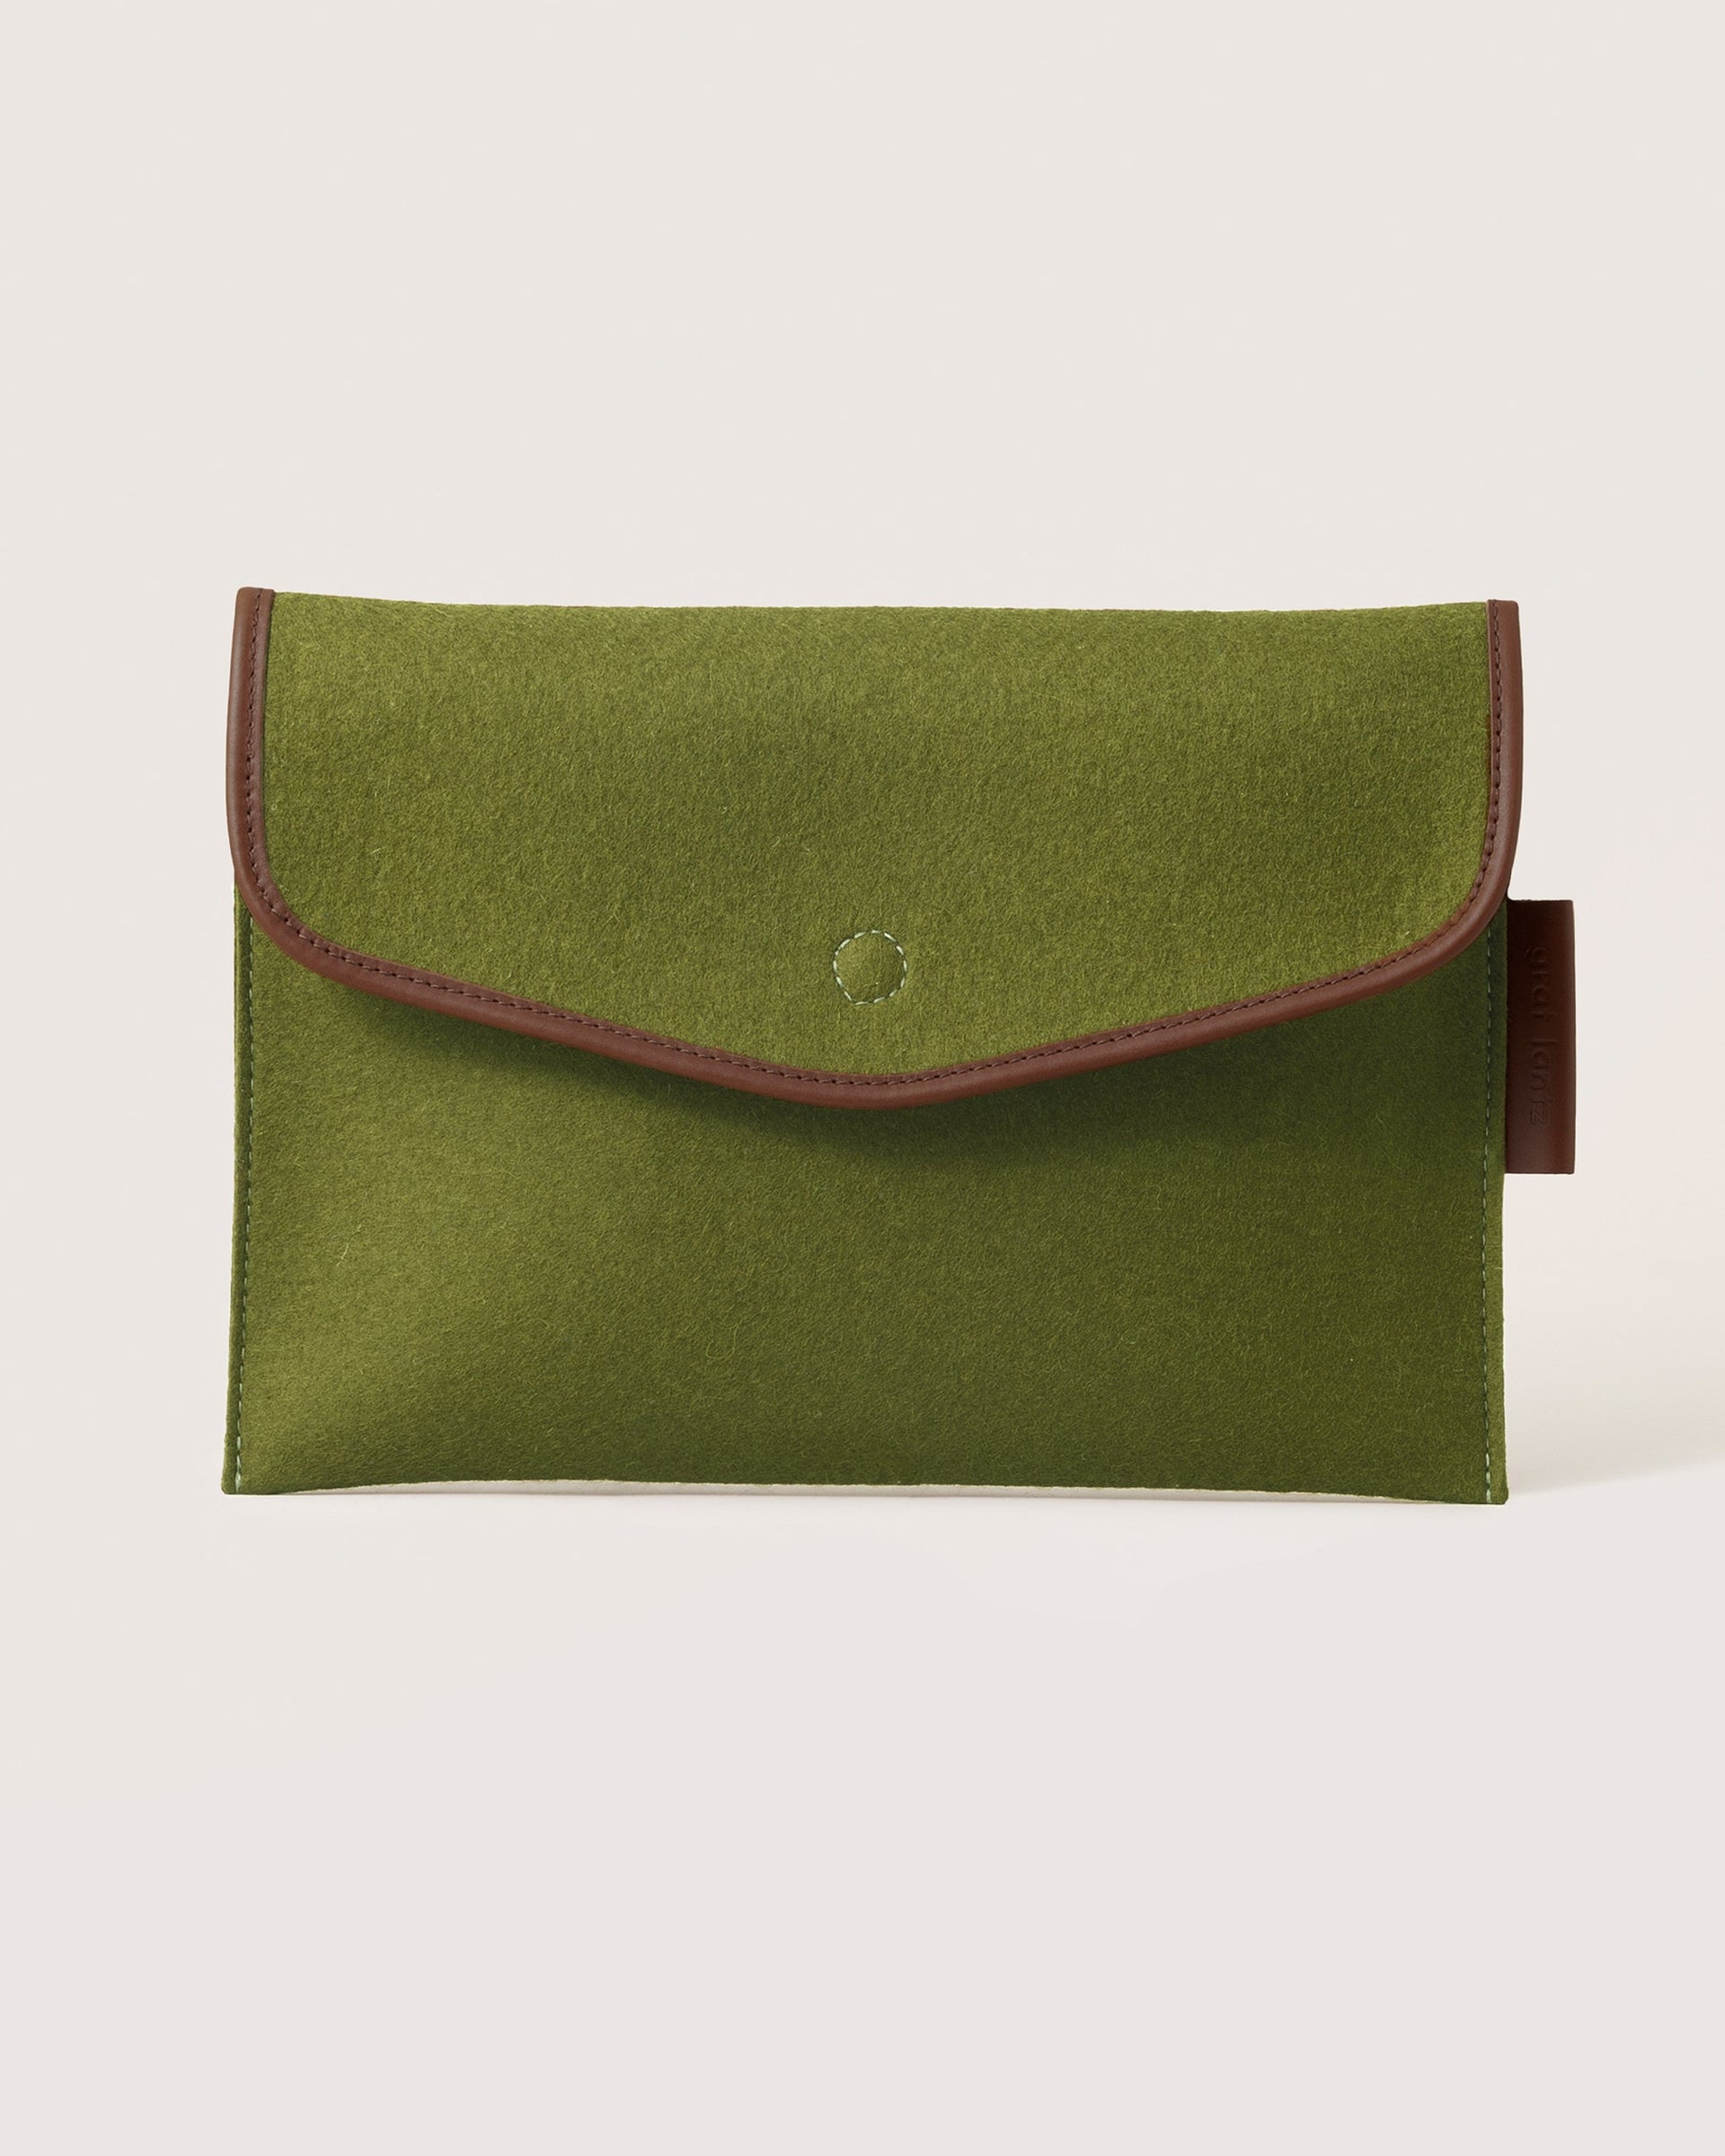 Envelope Merino Wool 16" Tech Sleeve in moss color with dark brown leather application by Graf Lantz, front view